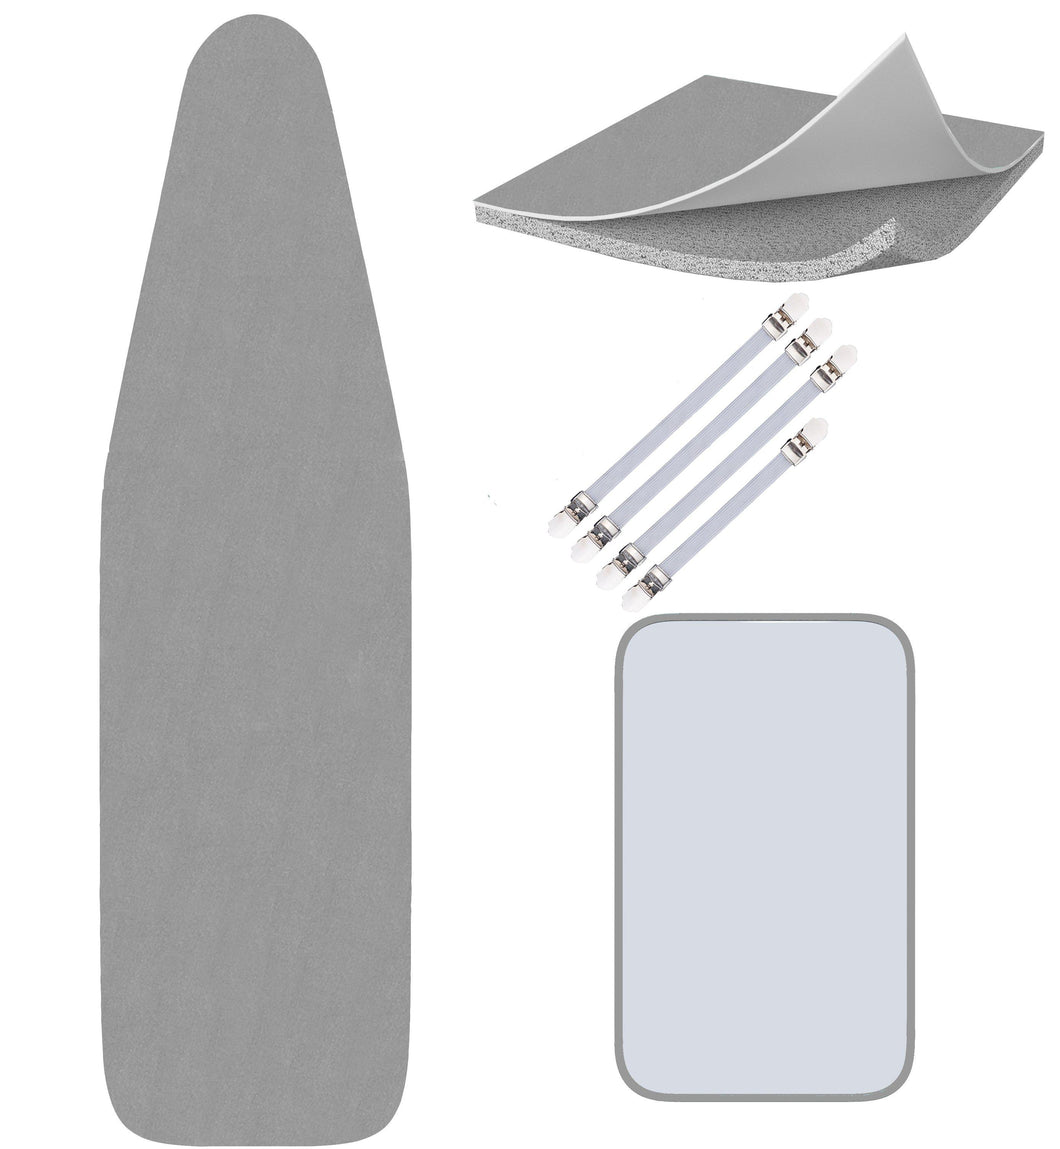 Silicone Ironing Board Cover - Scorch Proof with Bonus Adjustable Fasteners and Protective Mesh (15